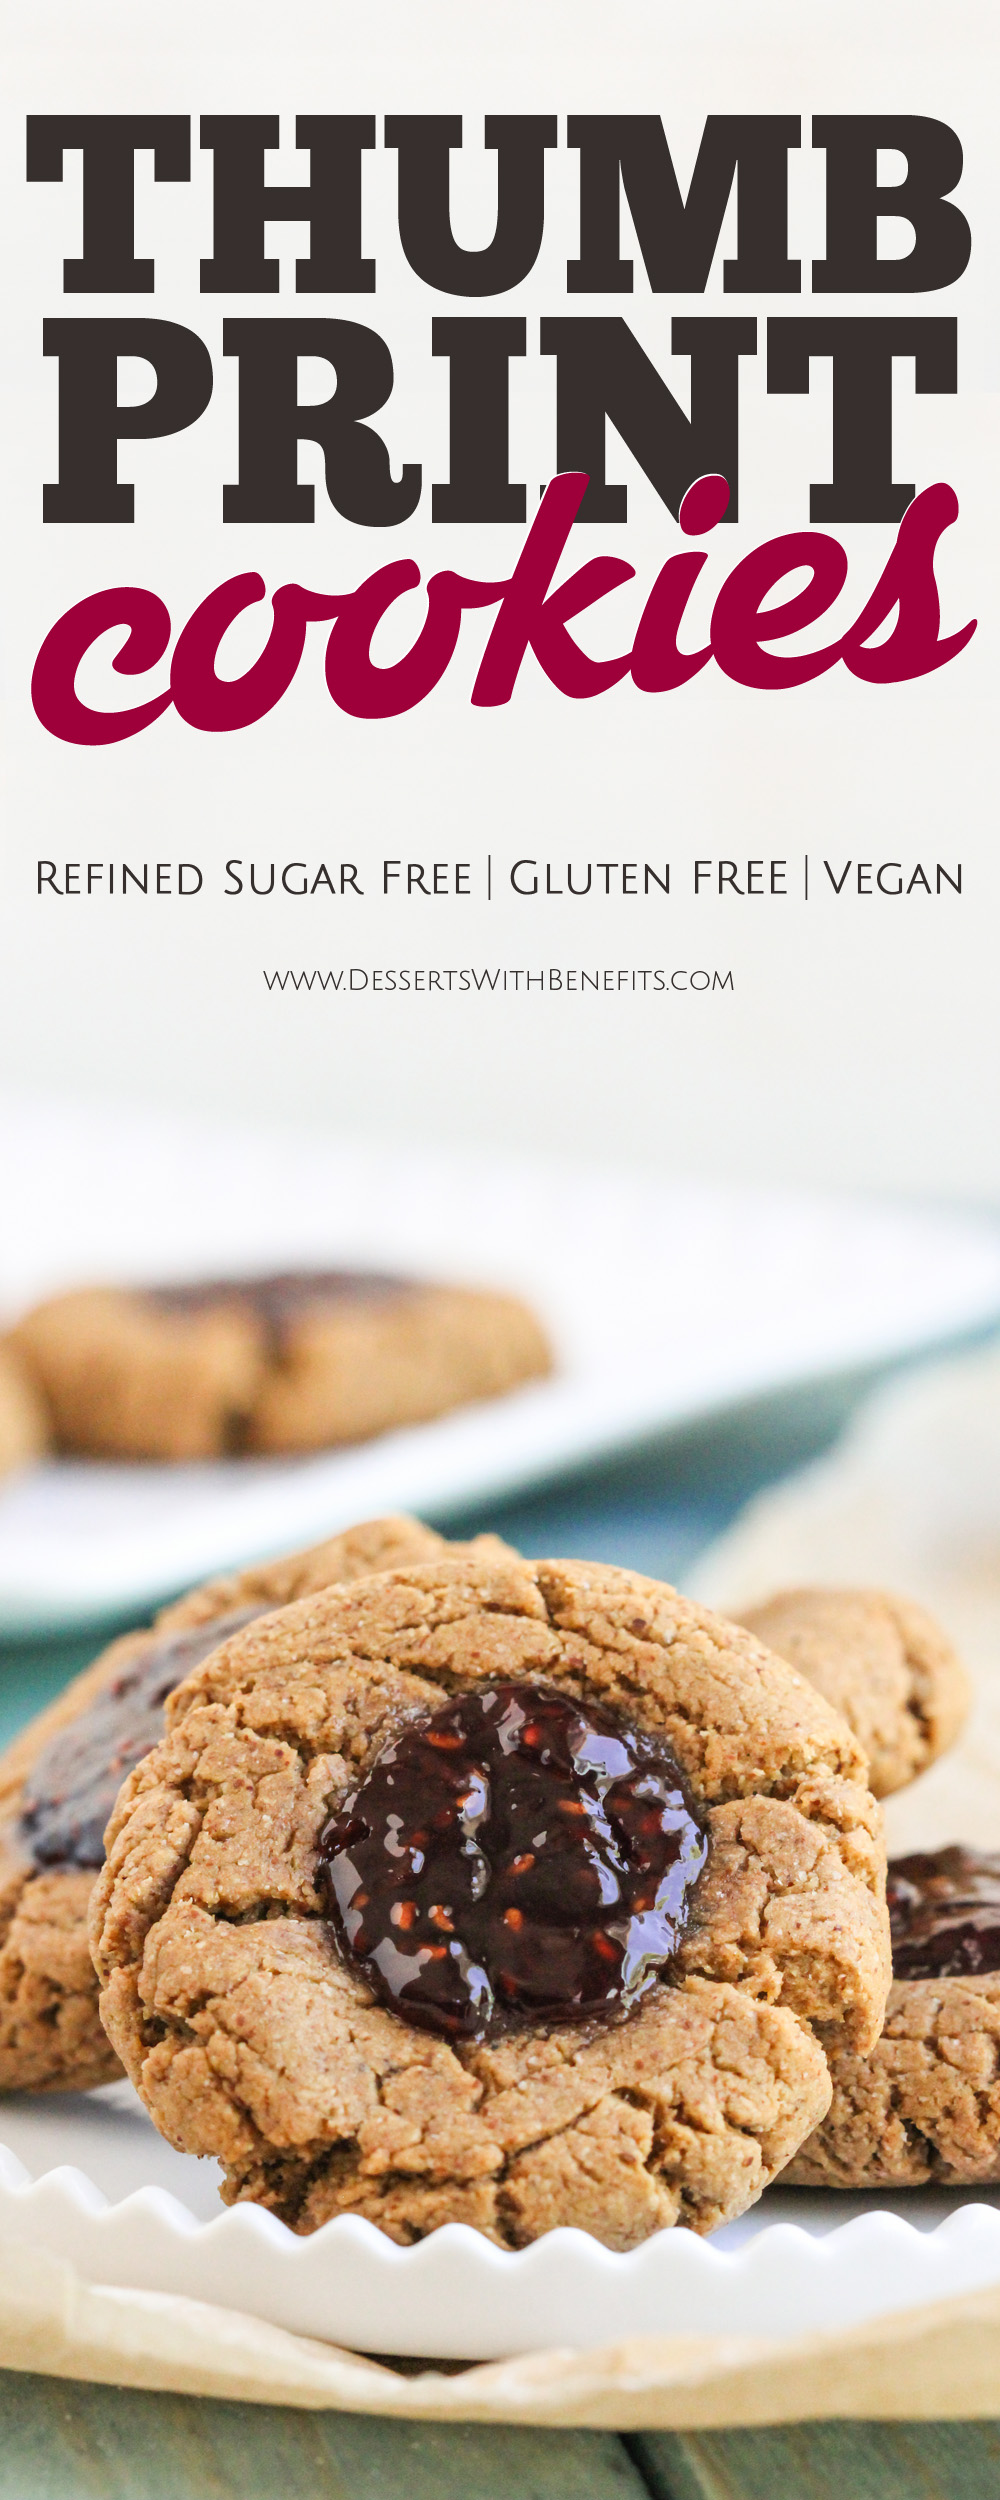 These soft and chewy 7-ingredient Healthy Thumbprint Cookies are so simple and delicious, you'd never know they're refined sugar free, gluten free, dairy free, and vegan! Healthy Dessert Recipes with low calorie, low fat, high protein, high fiber, and raw options at the Desserts With Benefits Blog (www.DessertsWithBenefits.com)